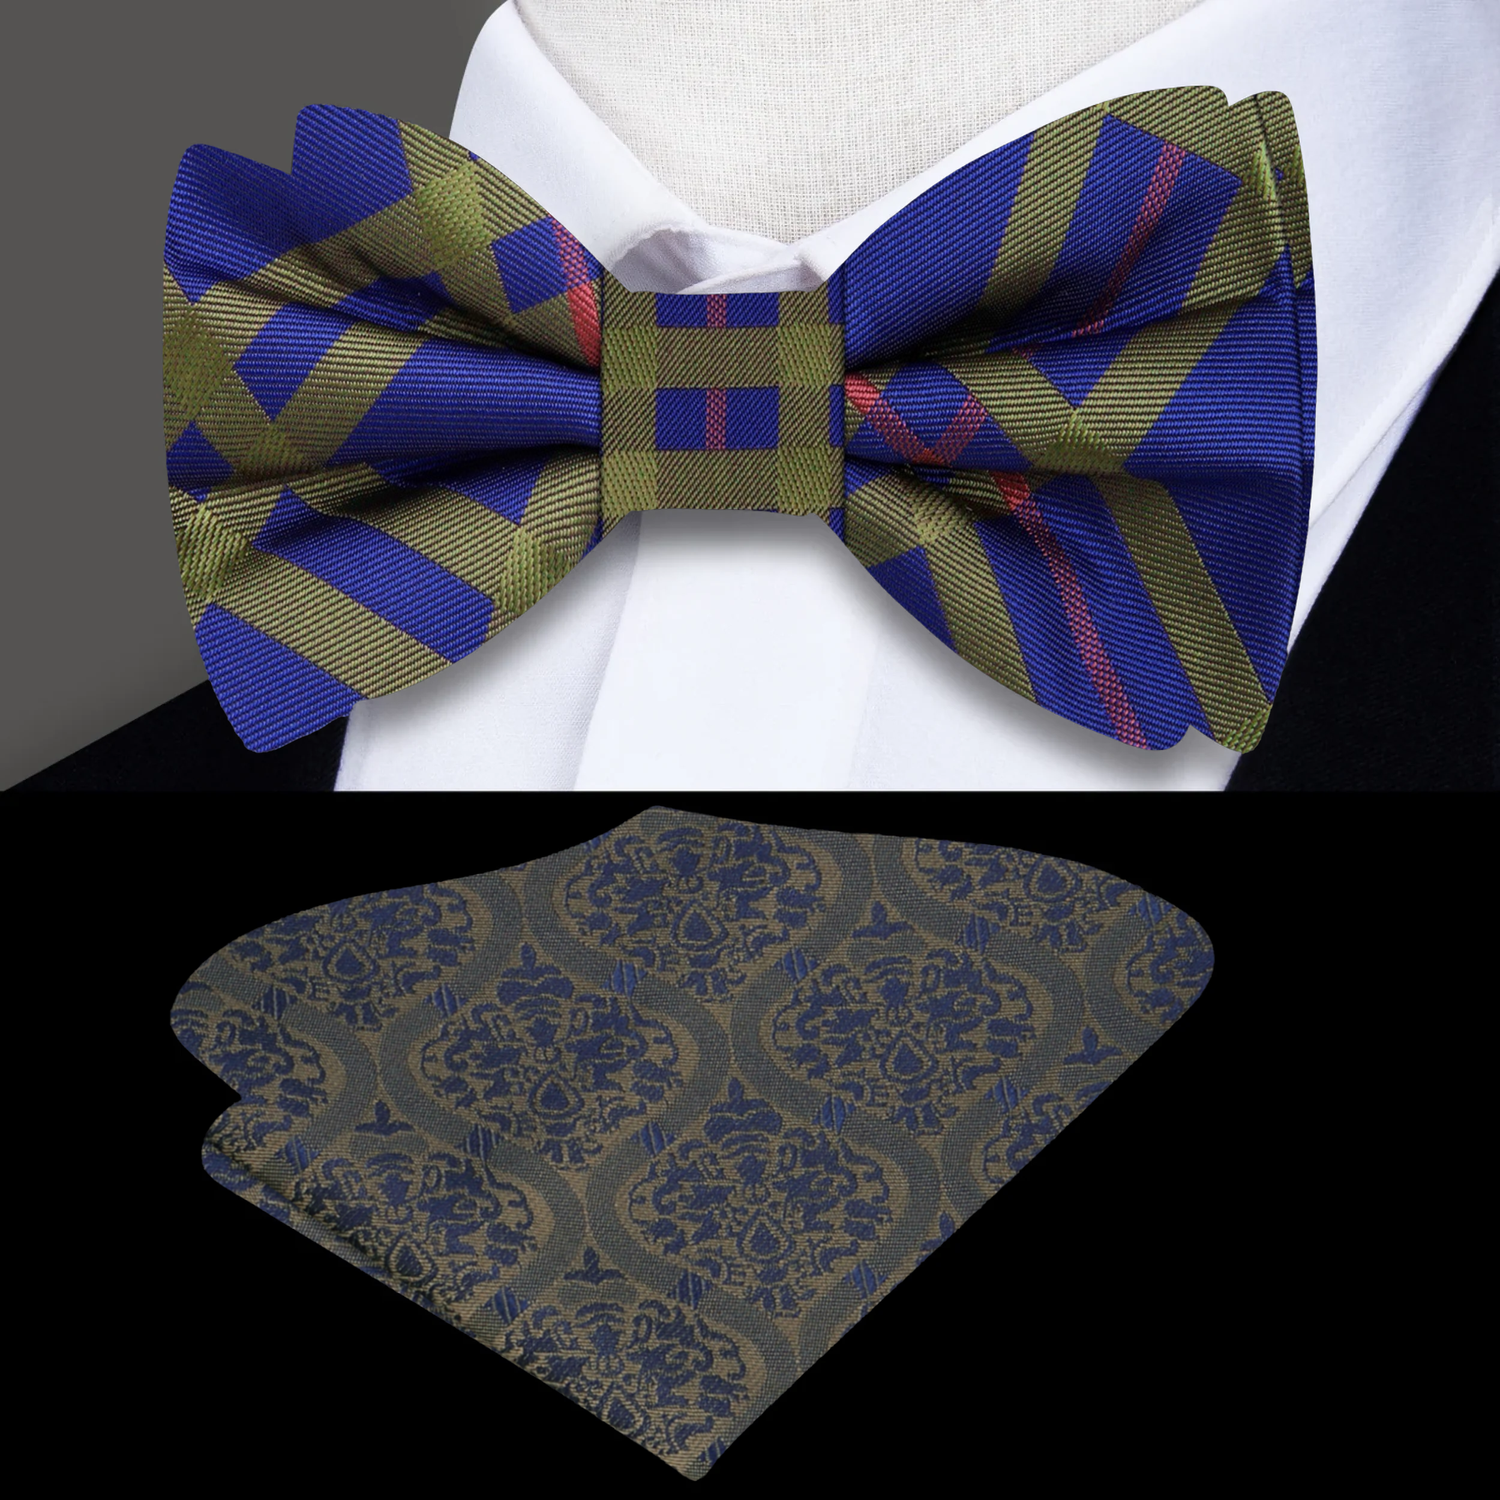 Cobalt Blue, Pale Olive, Pale Red Plaid Bow Tie And Accenting Pocket Square